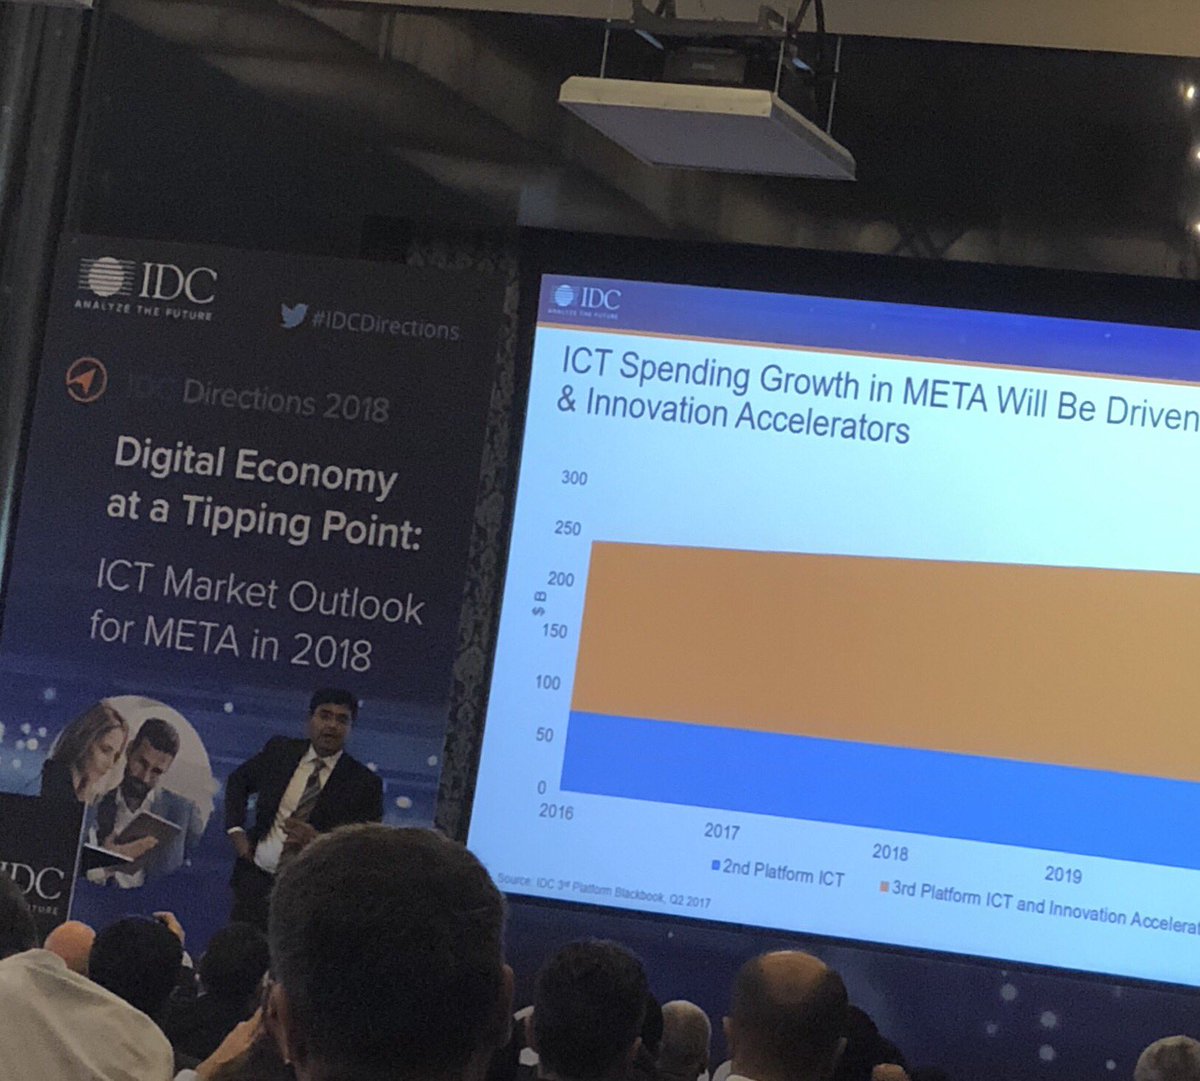 @JyotiIDC presenting the outlook for  #ICT in #meta .... #innovationaccelerators driving growth #IDCDirections